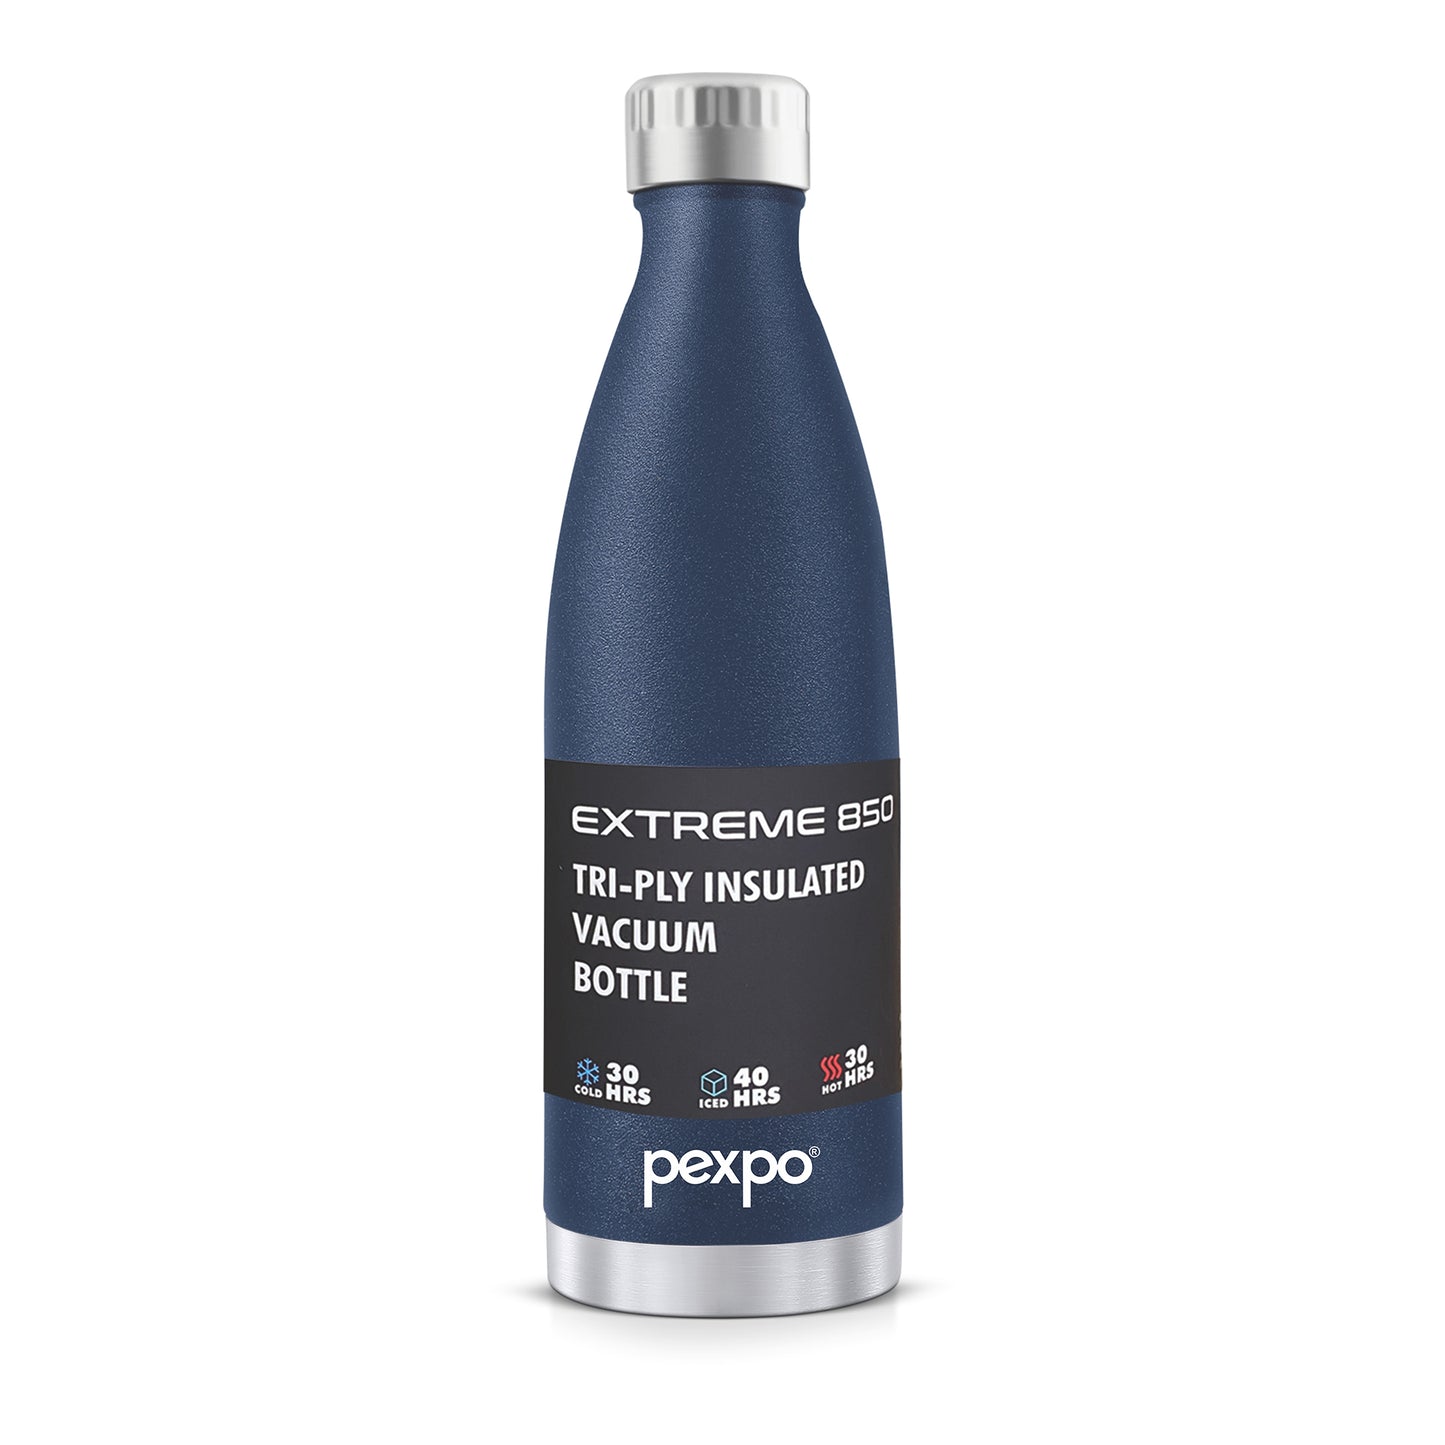 Pexpo Extreme - Stainless Steel Hot and Cold Vacuum Insulated Bottle | Lightweight & Keeps Drinks Hot/Cold for 30+ Hours